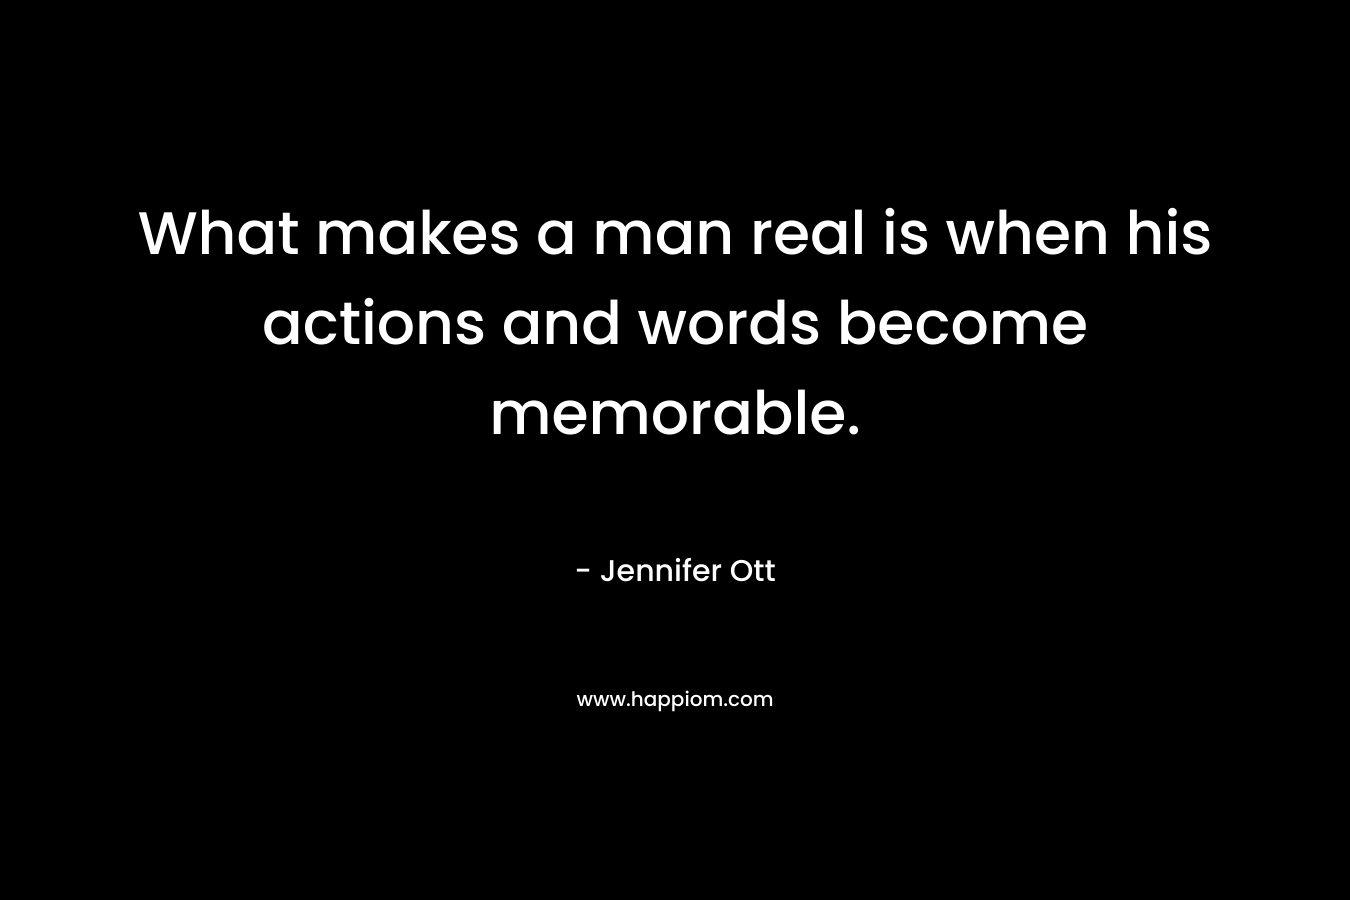 What makes a man real is when his actions and words become memorable. – Jennifer Ott